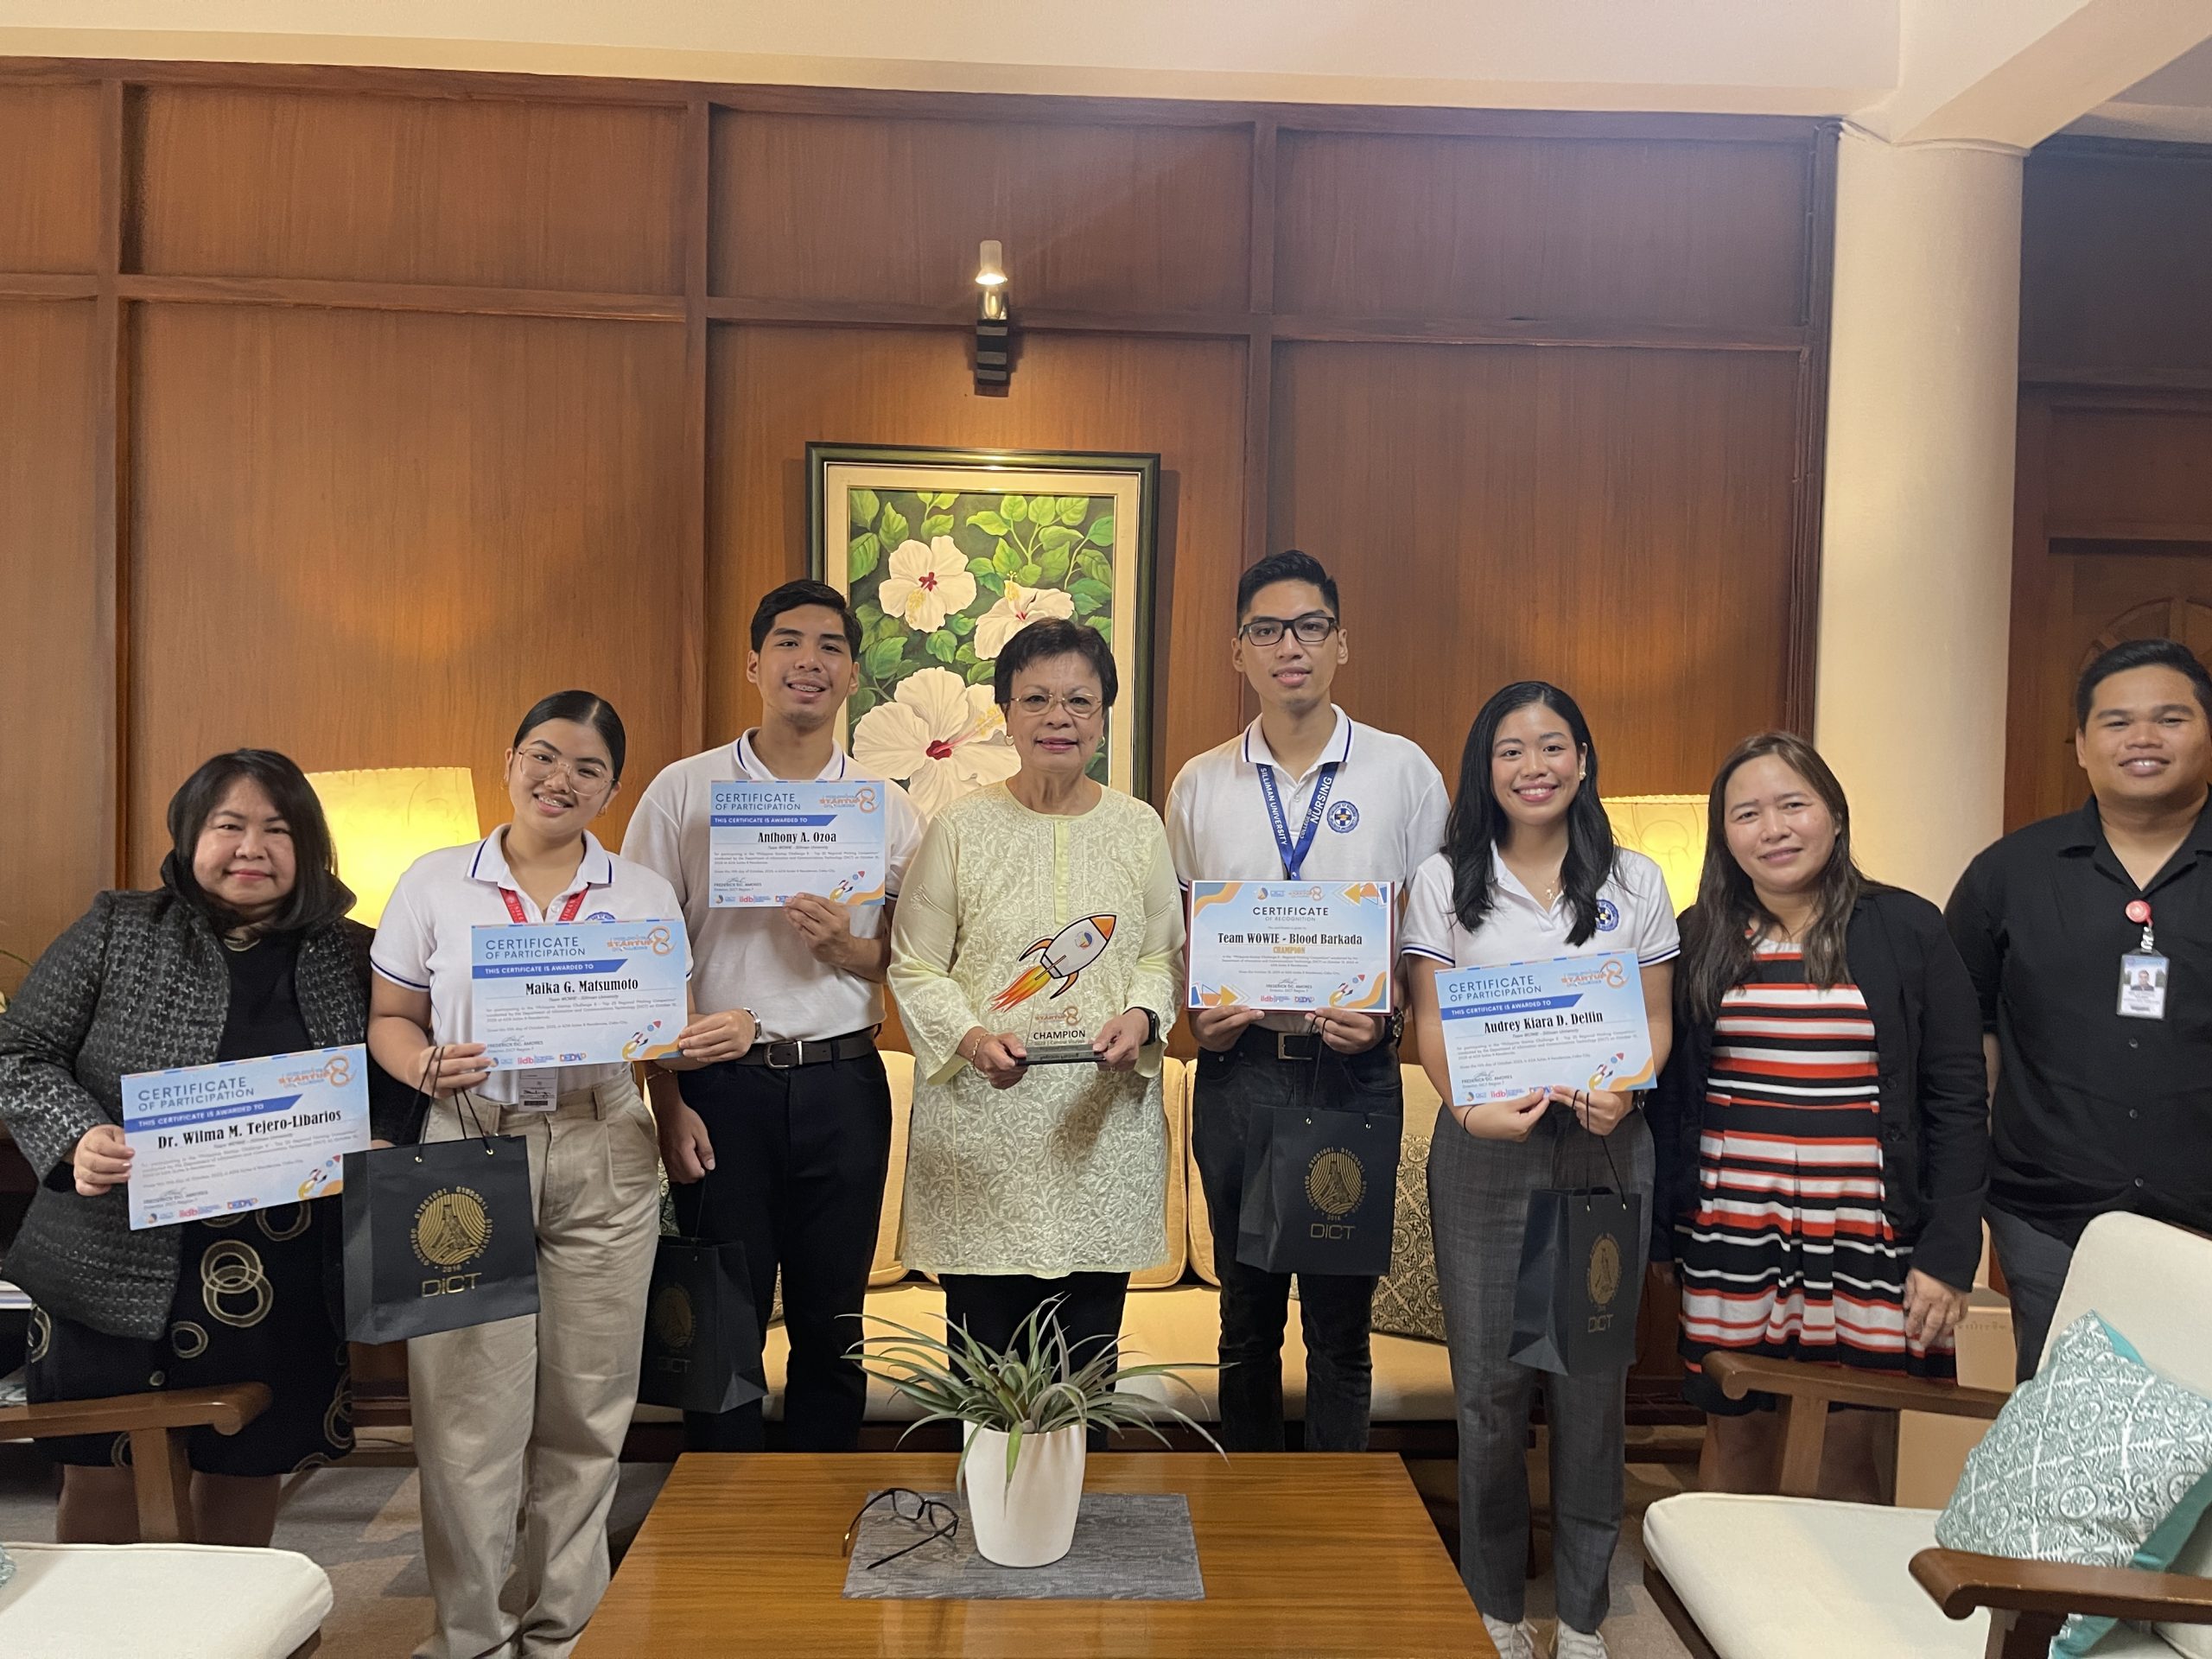 Nursing students bag championship in regional startup pitching competition